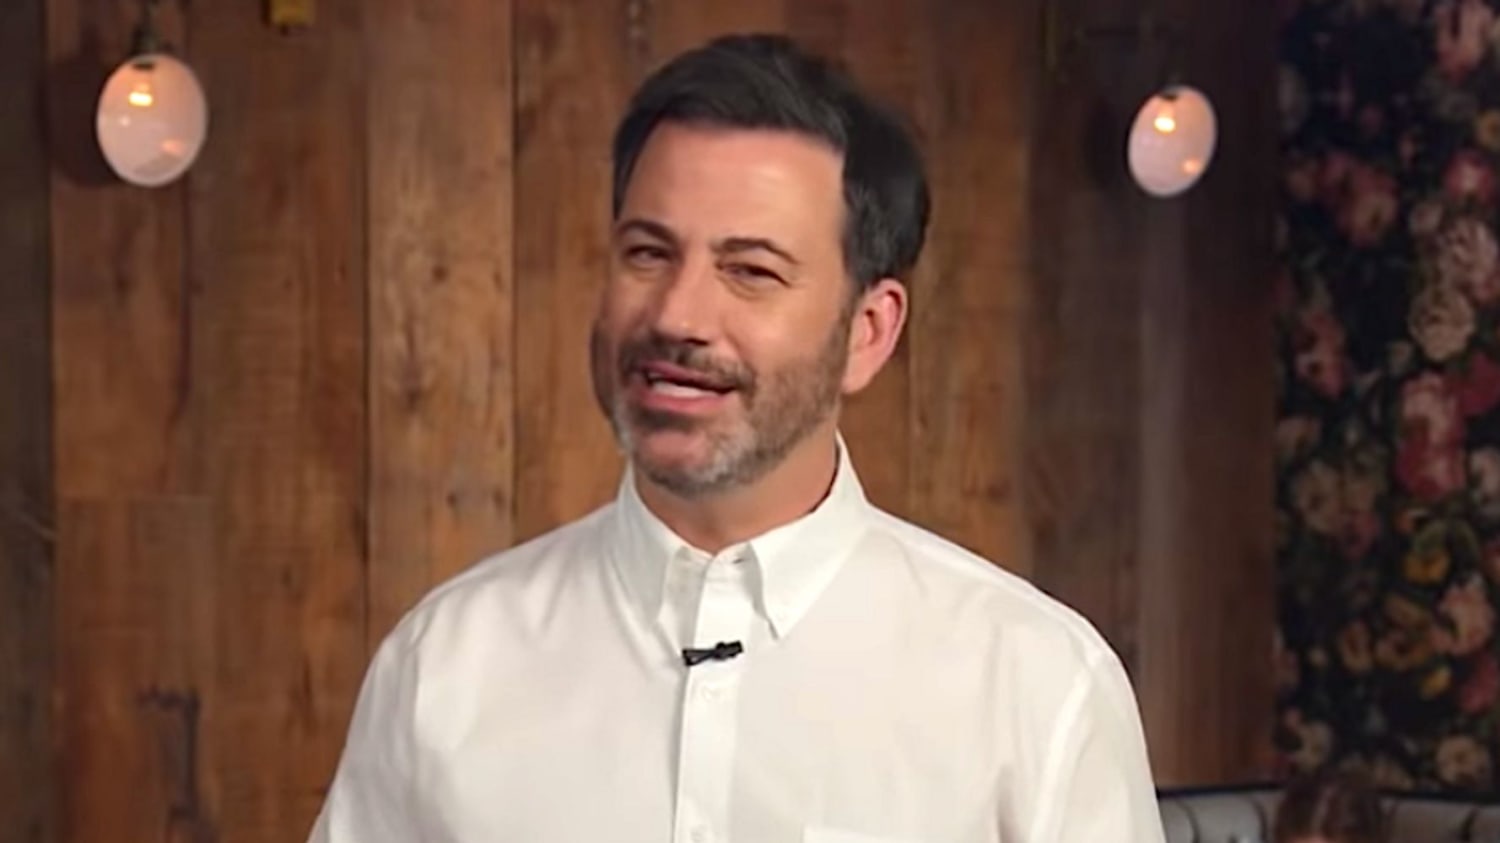 Jimmy Kimmel Hilariously Explains Why Twitter Doesn't Need To Fact-Check Trump